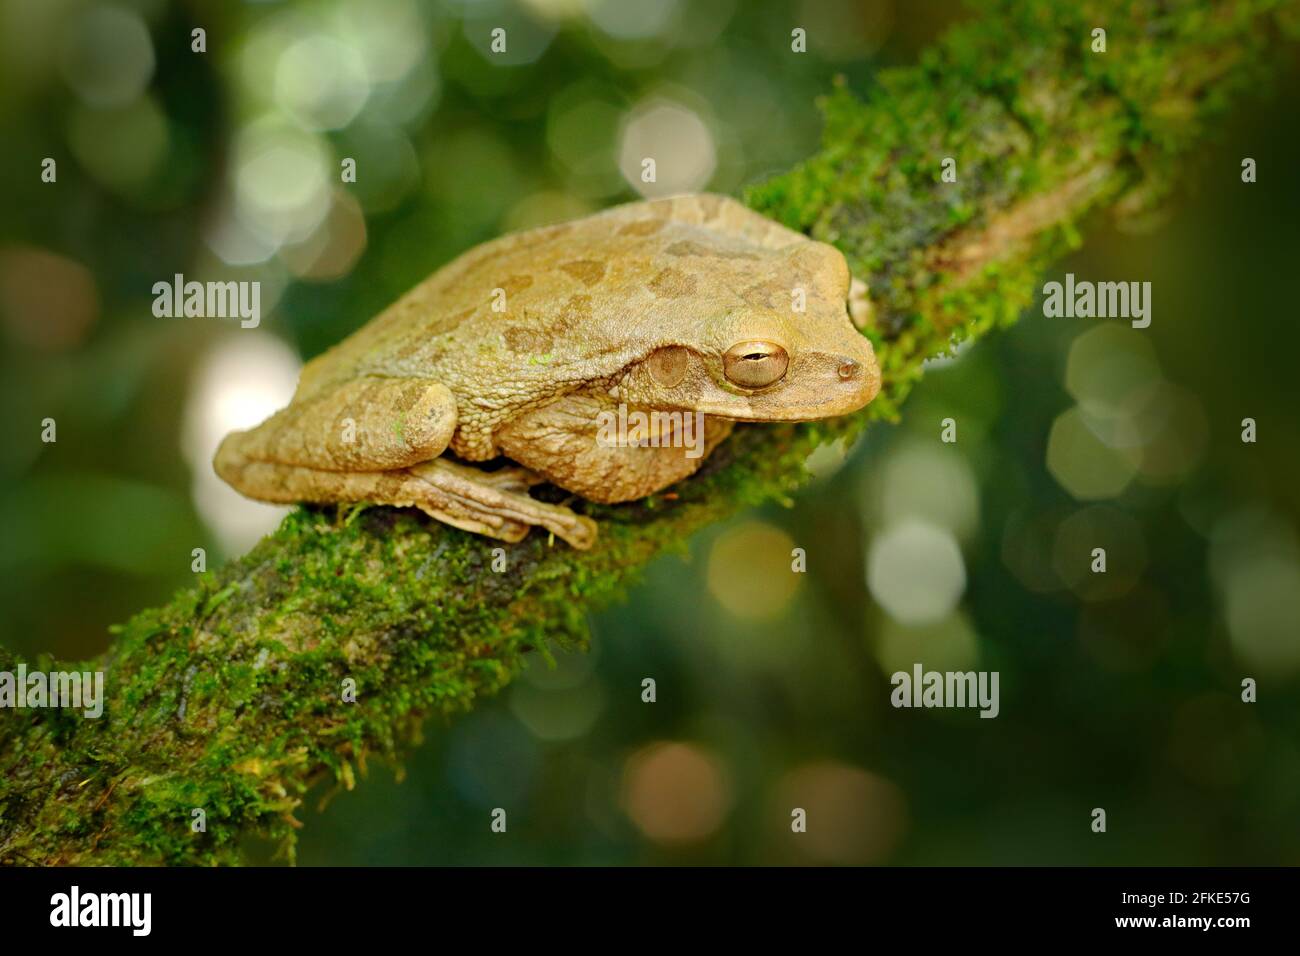 Smilisca baudinii, Mexican tree frog, in the gren nature. Exotic tropical green frog from Costa Rica, close-up portrait. Wildlife scene from nature, a Stock Photo